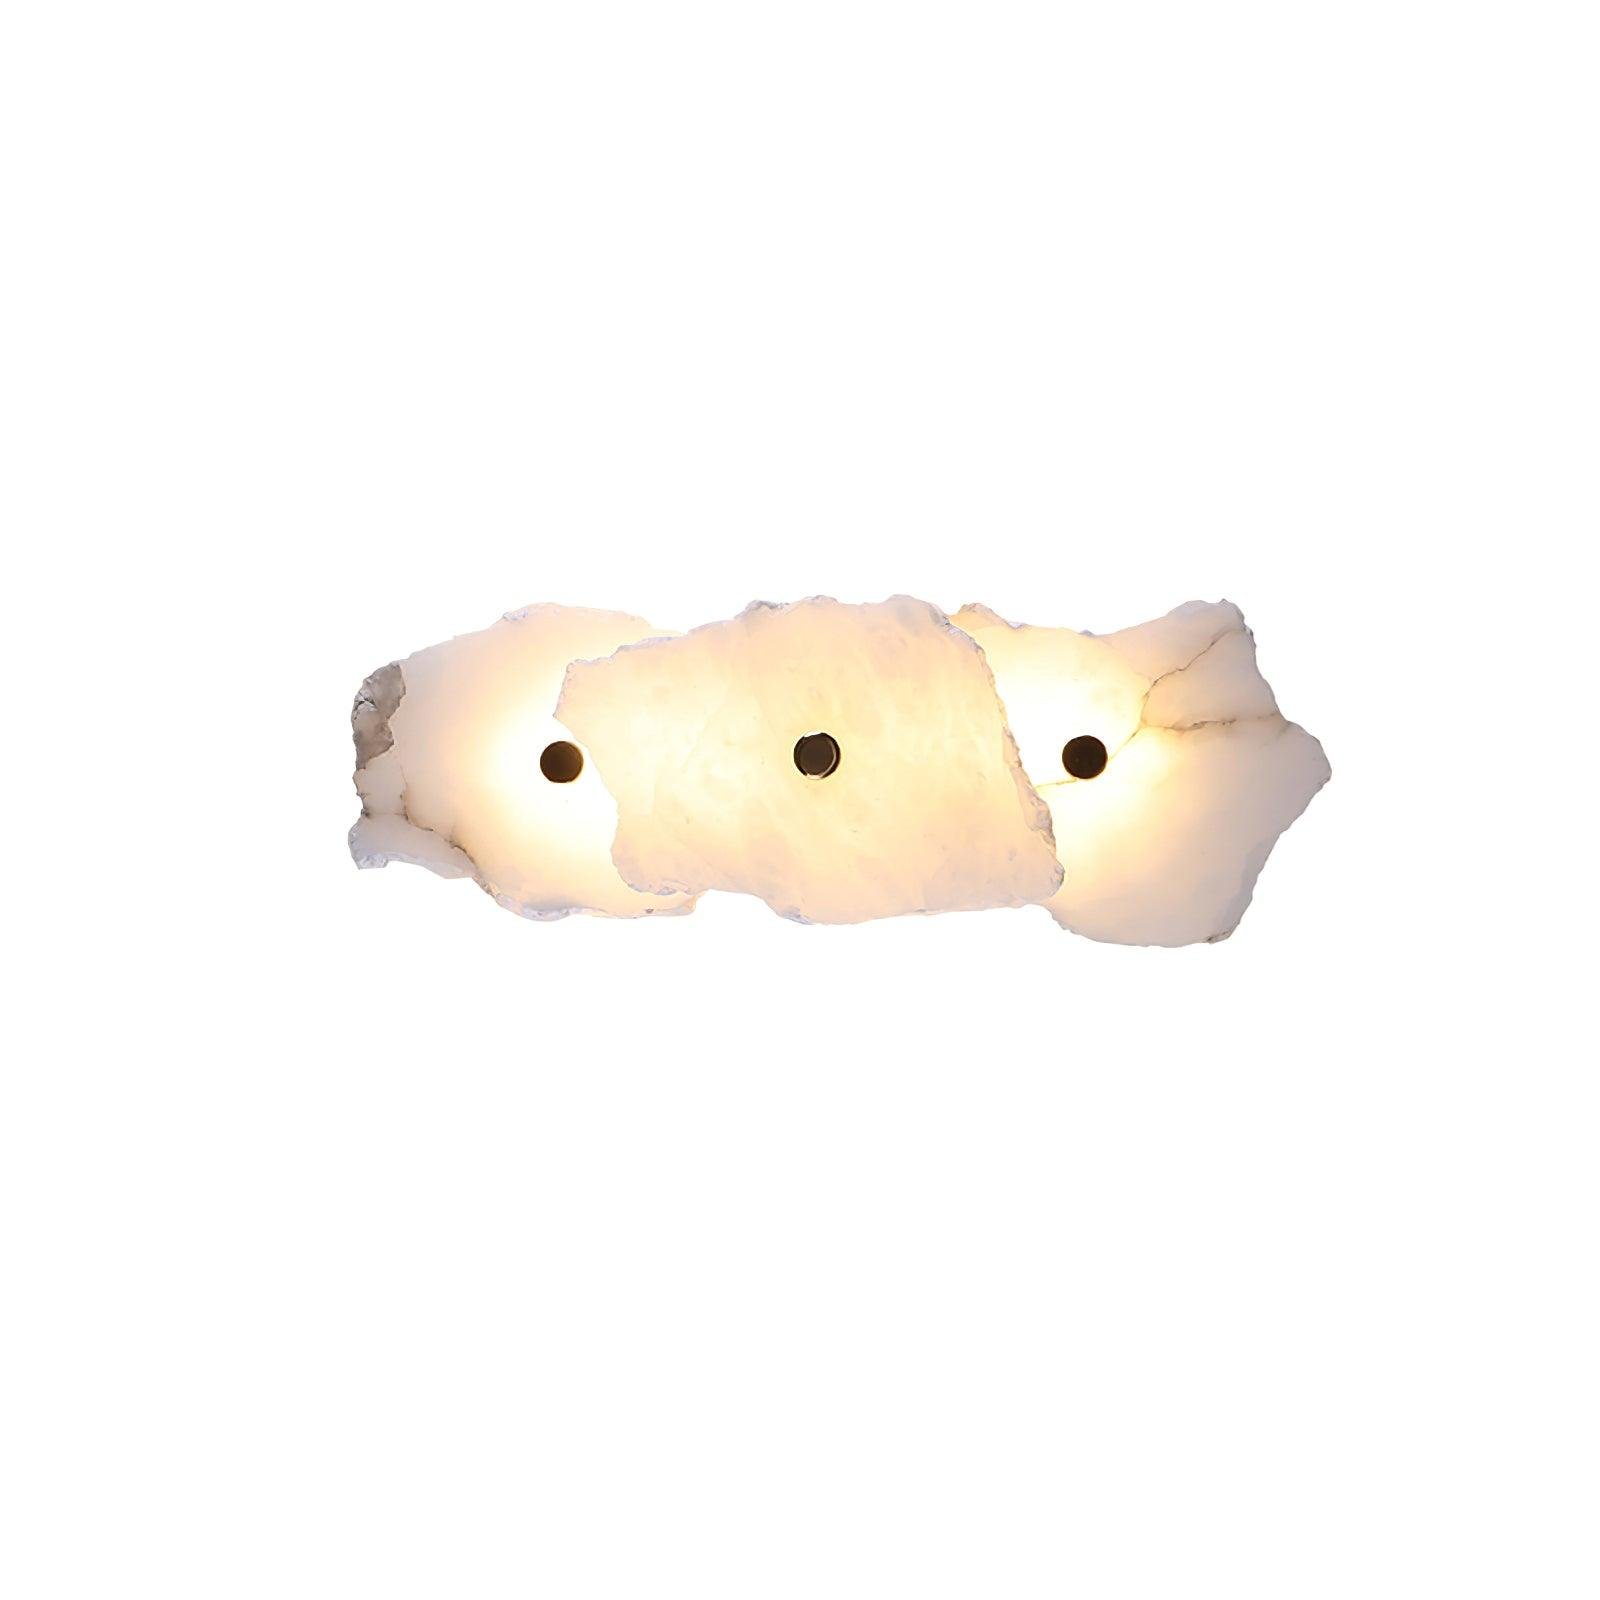 Petra Wall Lamps in Gold+ White Alabaster, Set of 2, Size: L 15.7" x W 5.1" x H 3.5"